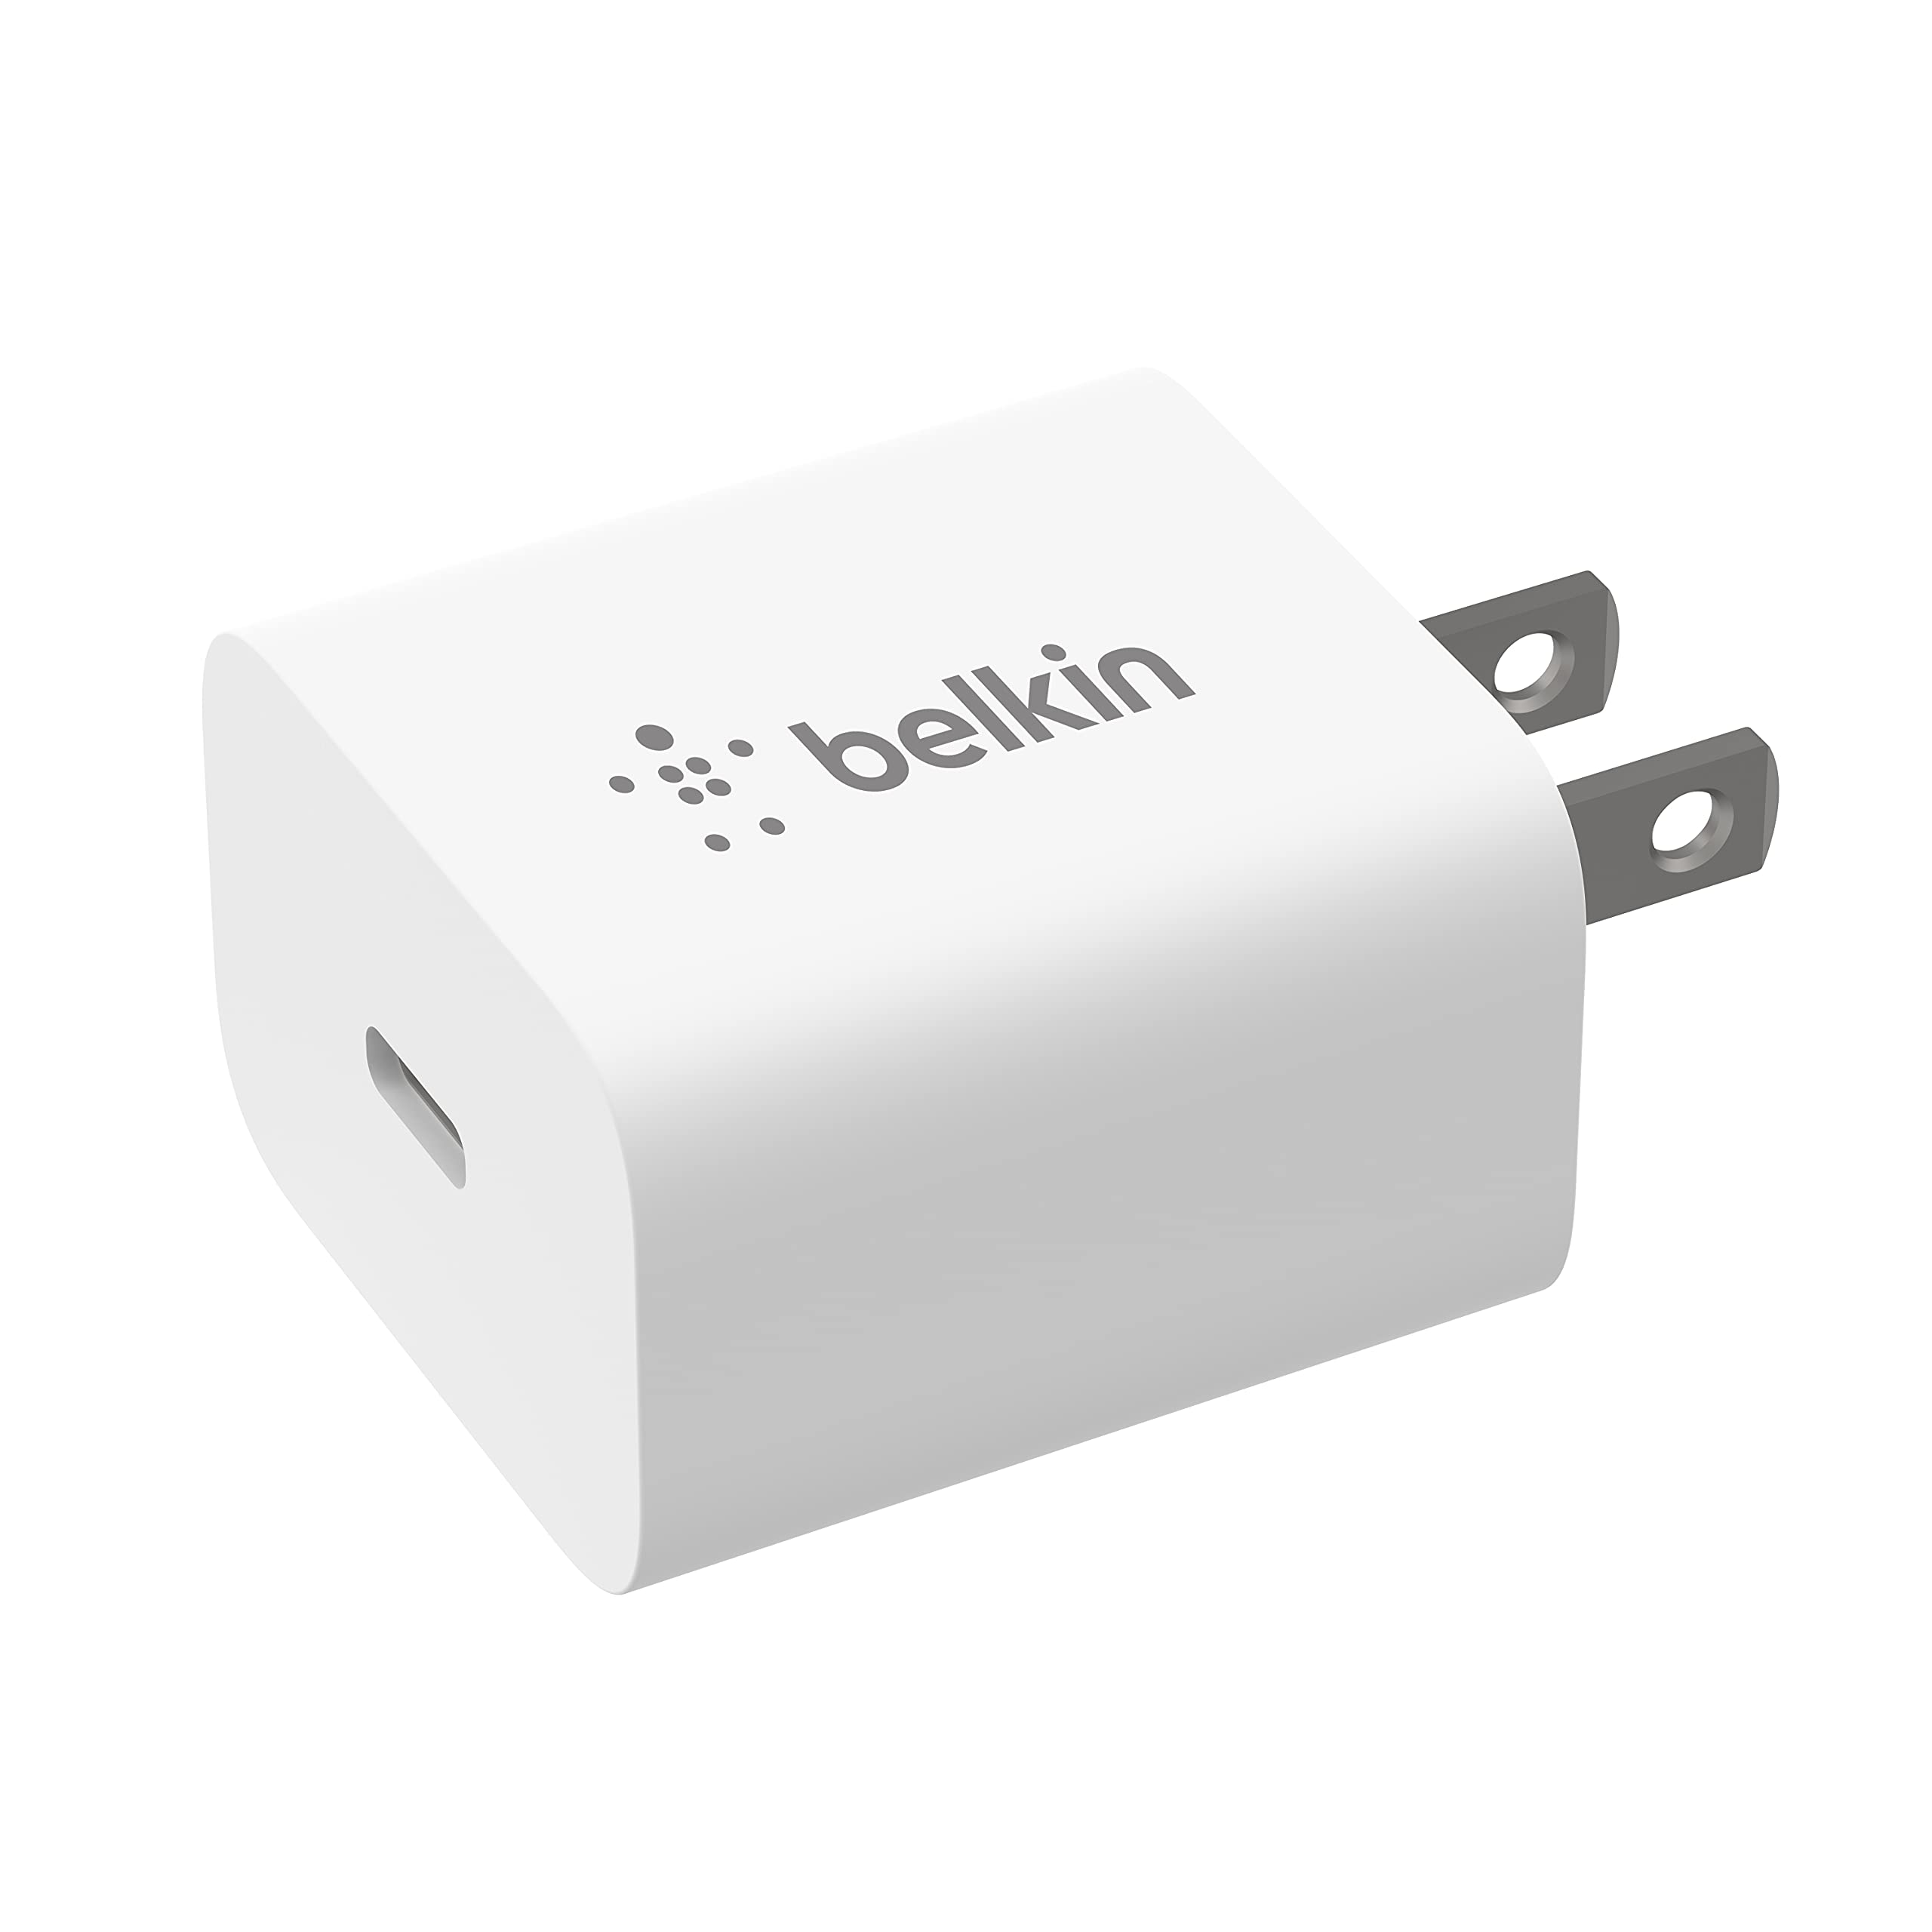 Belkin 20 Watt USB C Wall Charger - USB Type C Charger Fast Charging for Apple iPhone 14, 14 Pro, 14 Pro Max, 13, 13 Pro, 13 Pro Max, Galaxy S21 Ultra, iPad, AirPods & More - USBC Charger (1-Pack)